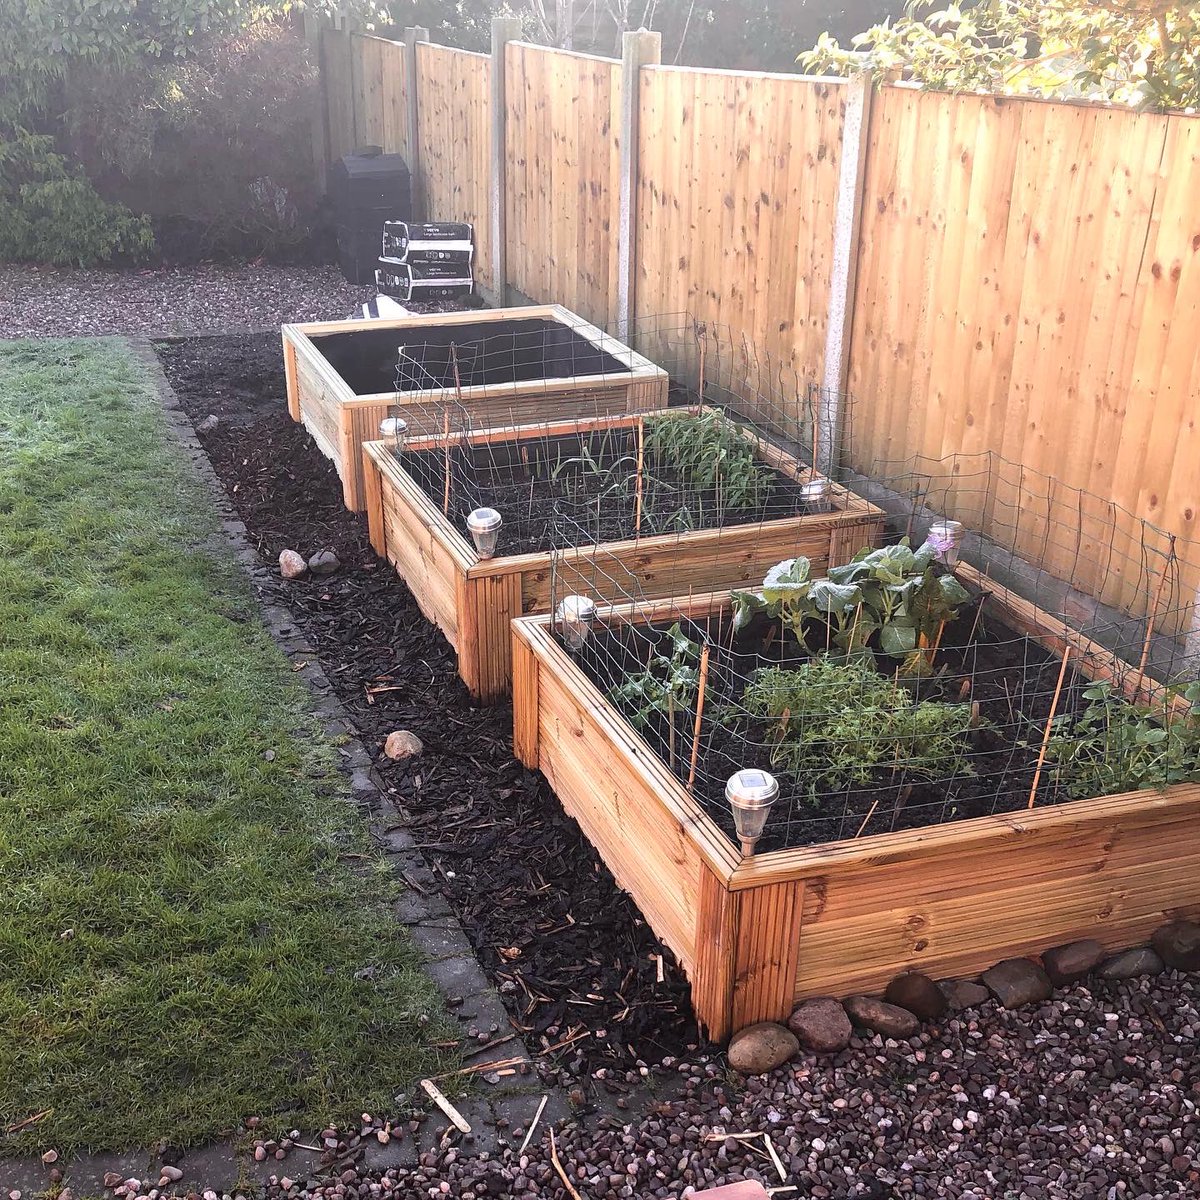 Third raised bed built and lined this morning #raisedbed #raisedbeds #raisedbedgarden #raisedbedgardening #vegpatch